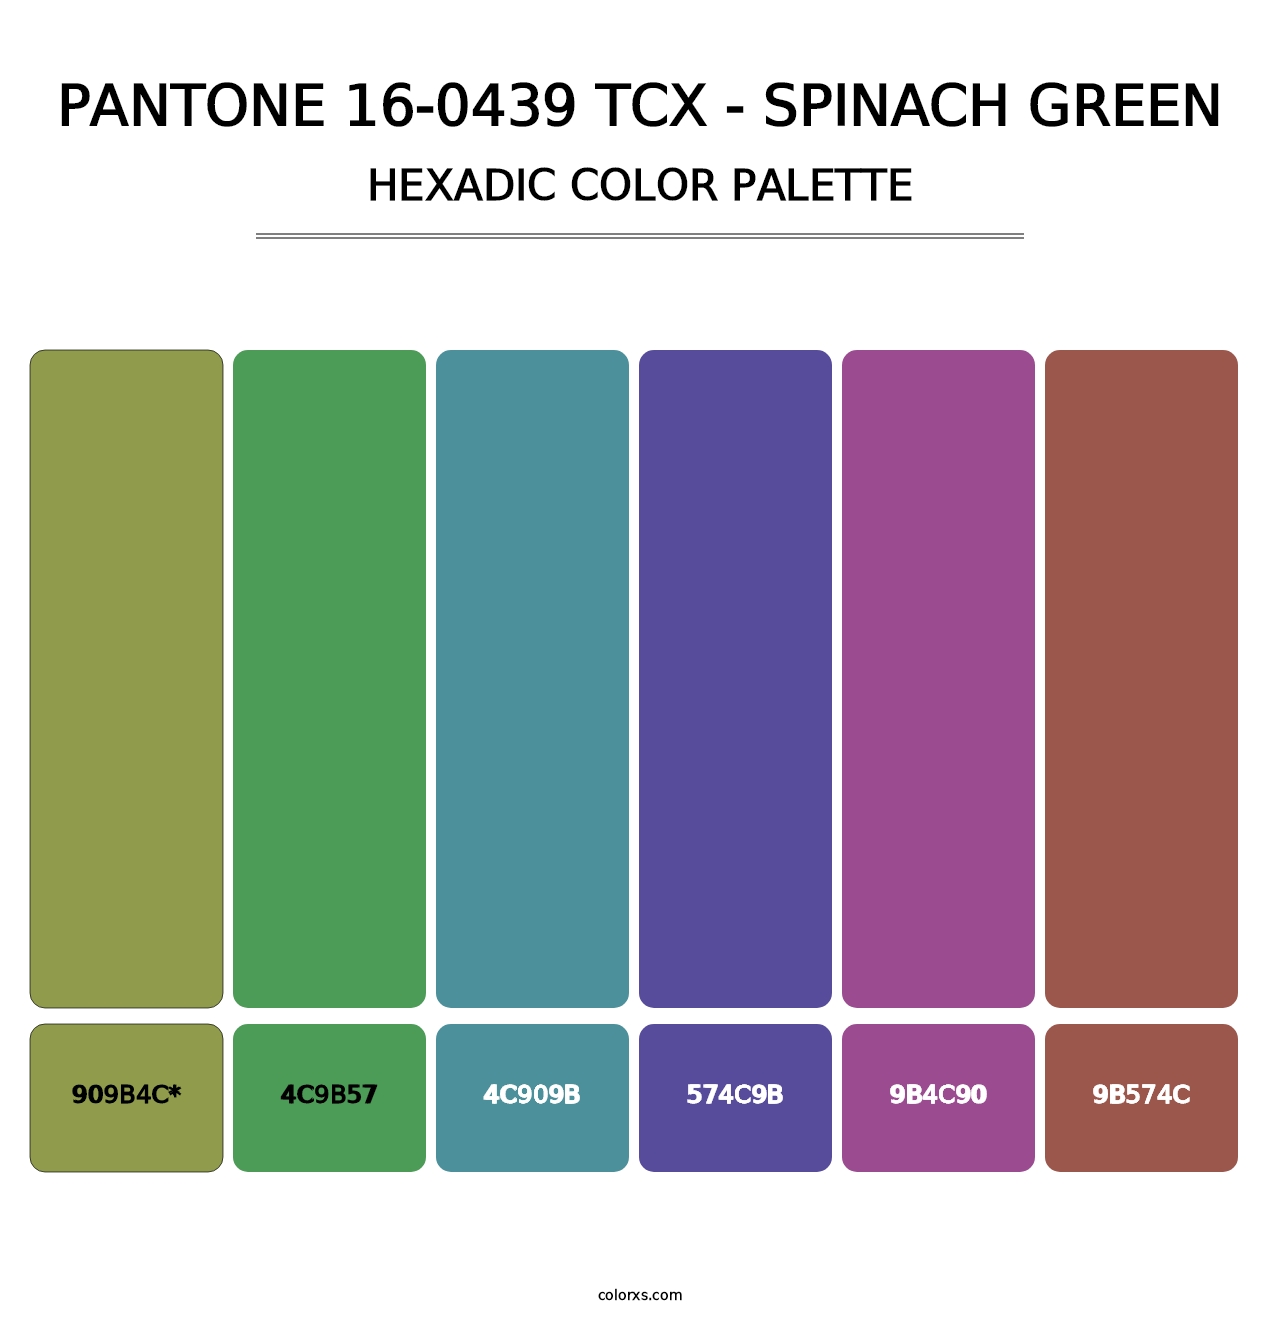 PANTONE 16-0439 TCX - Spinach Green - Hexadic Color Palette